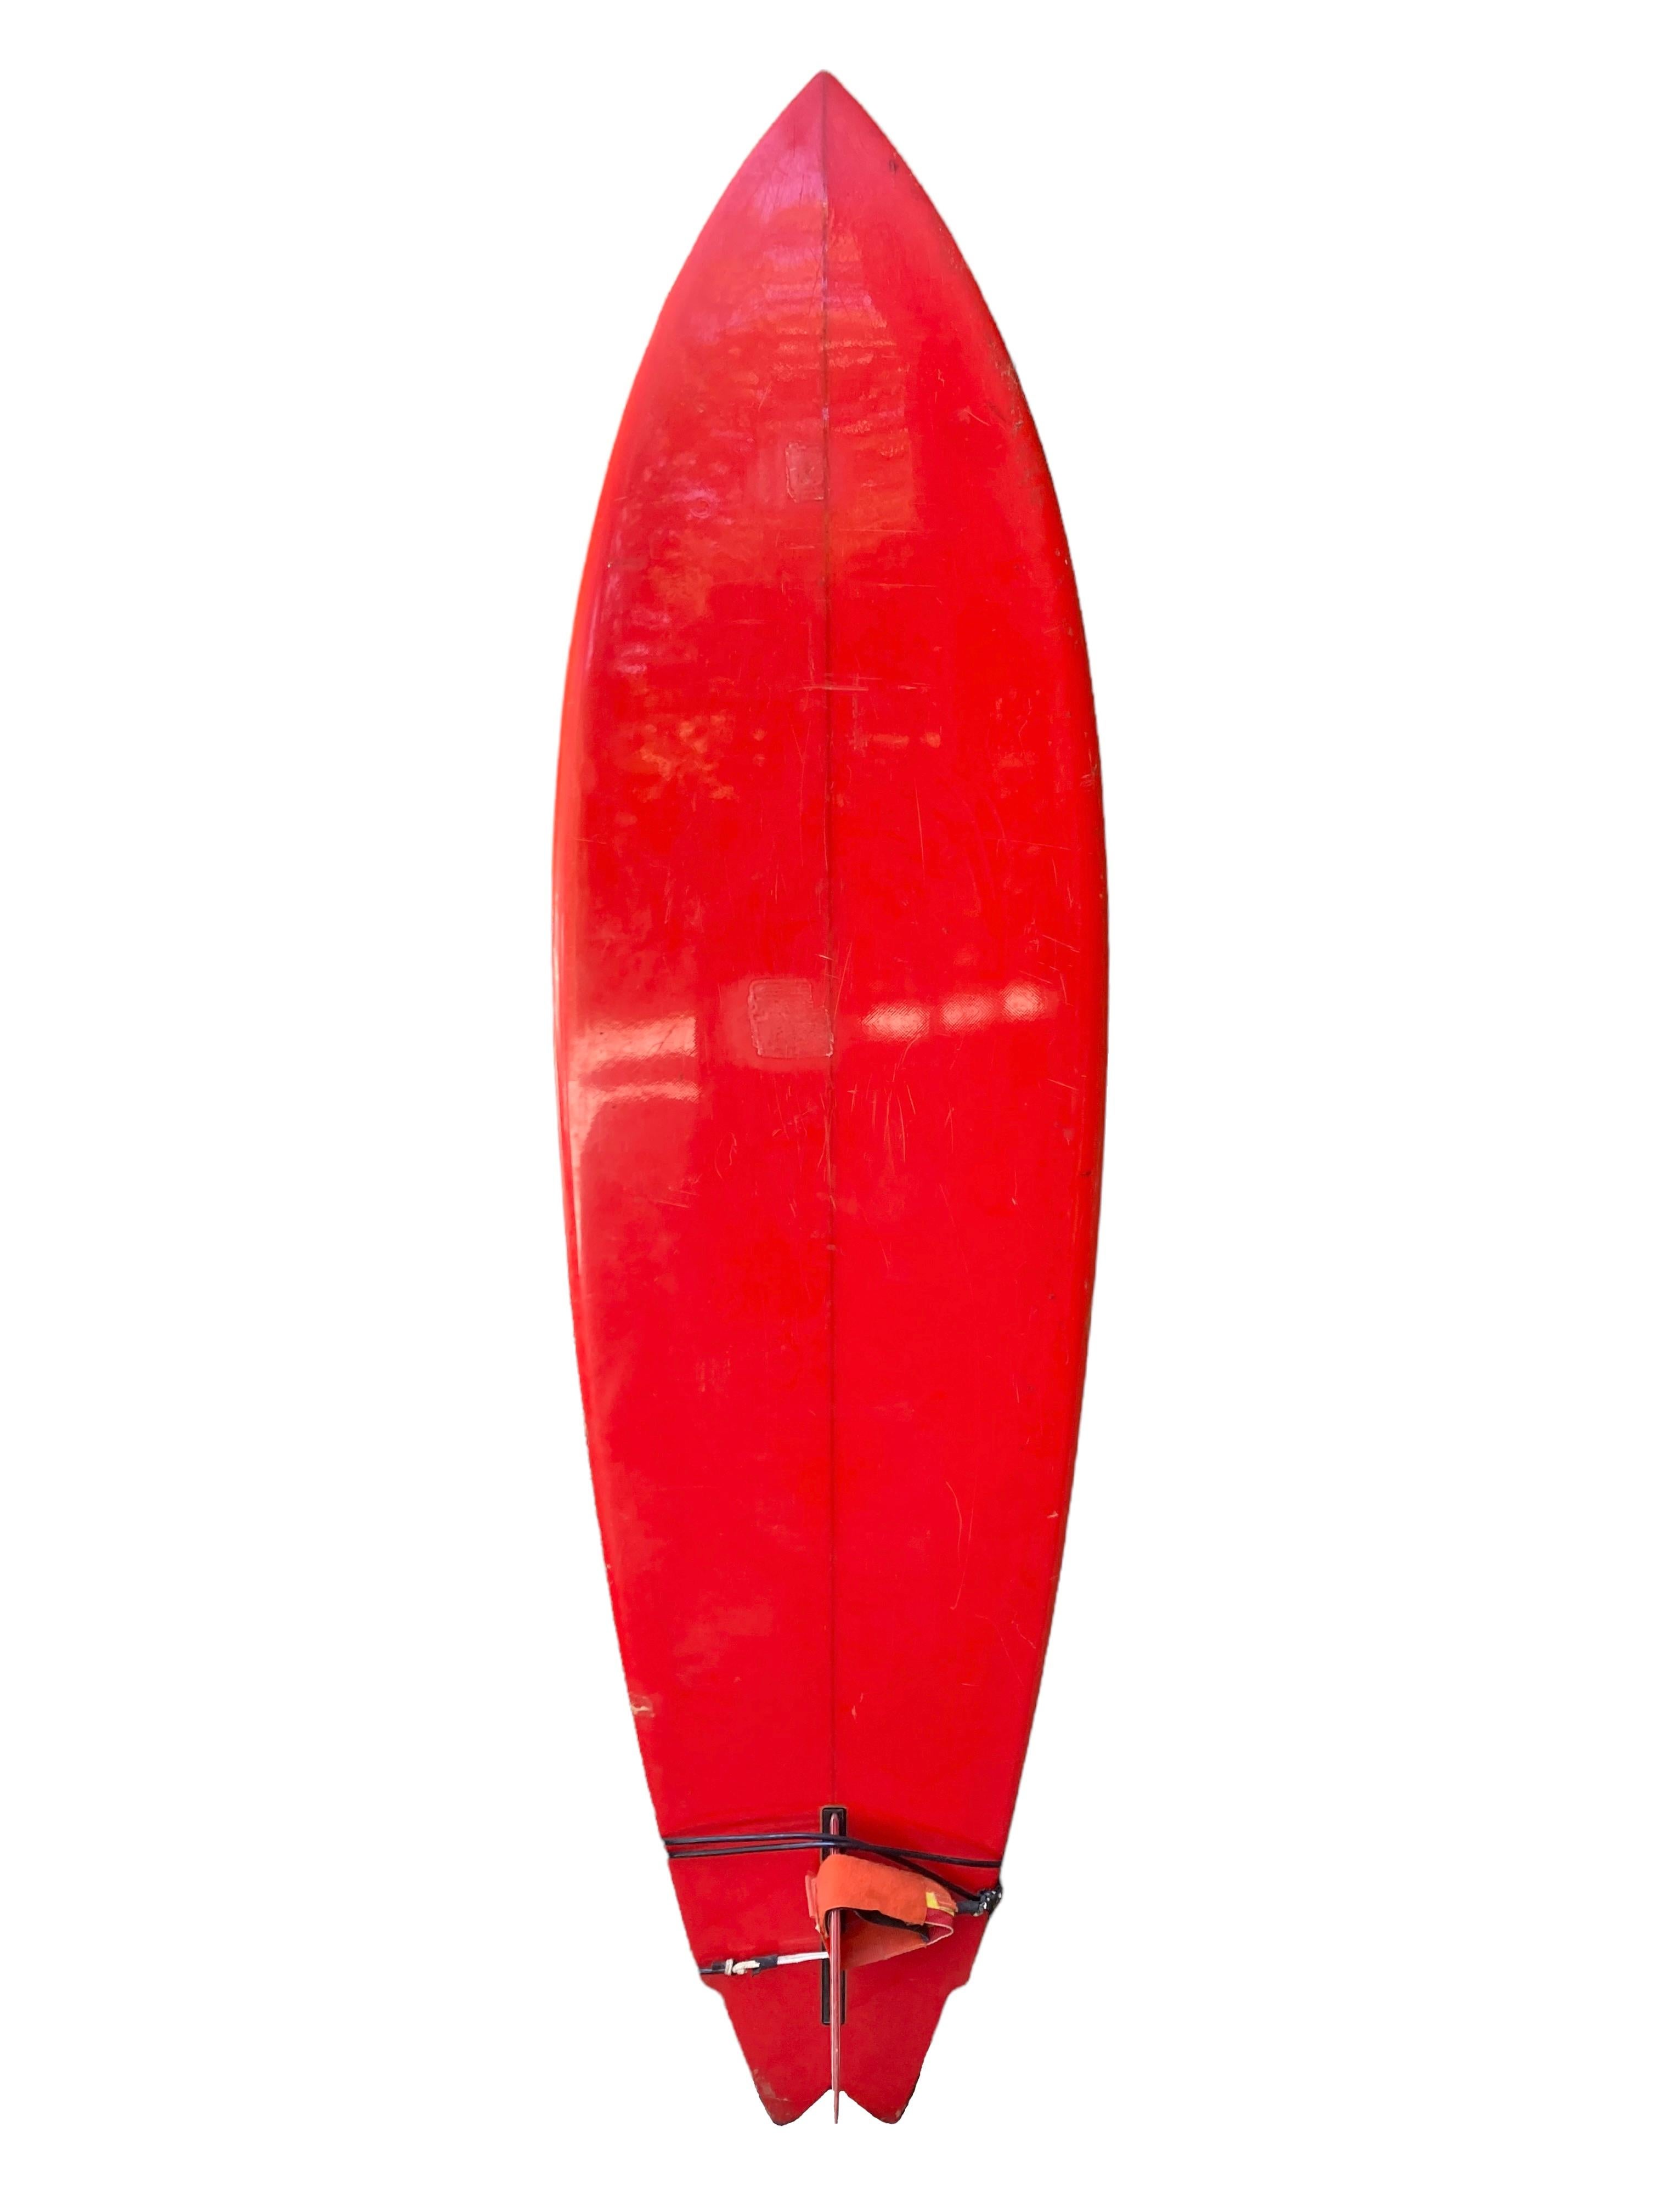 Early-1970s Sunset Surfboards classic single fin. Features a beautiful orange tint with pinstriped outline including lightning bolt jag design along the rails. Winged swallow tail shape with original box single fin. Includes an early leg leash which